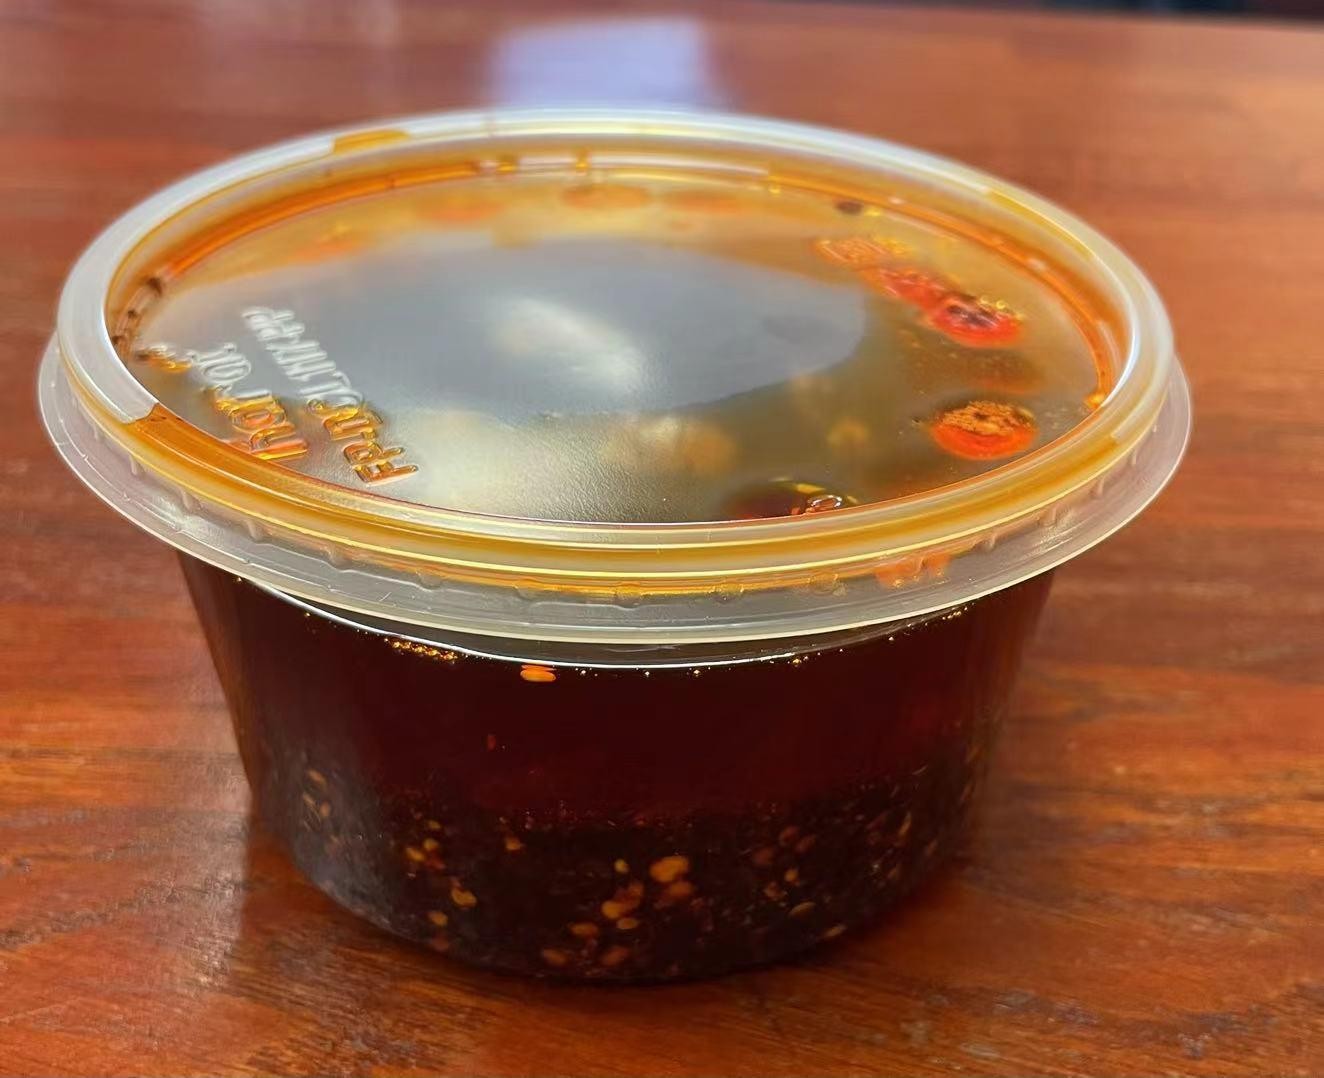 House Special Chili Oil 秘制辣椒油